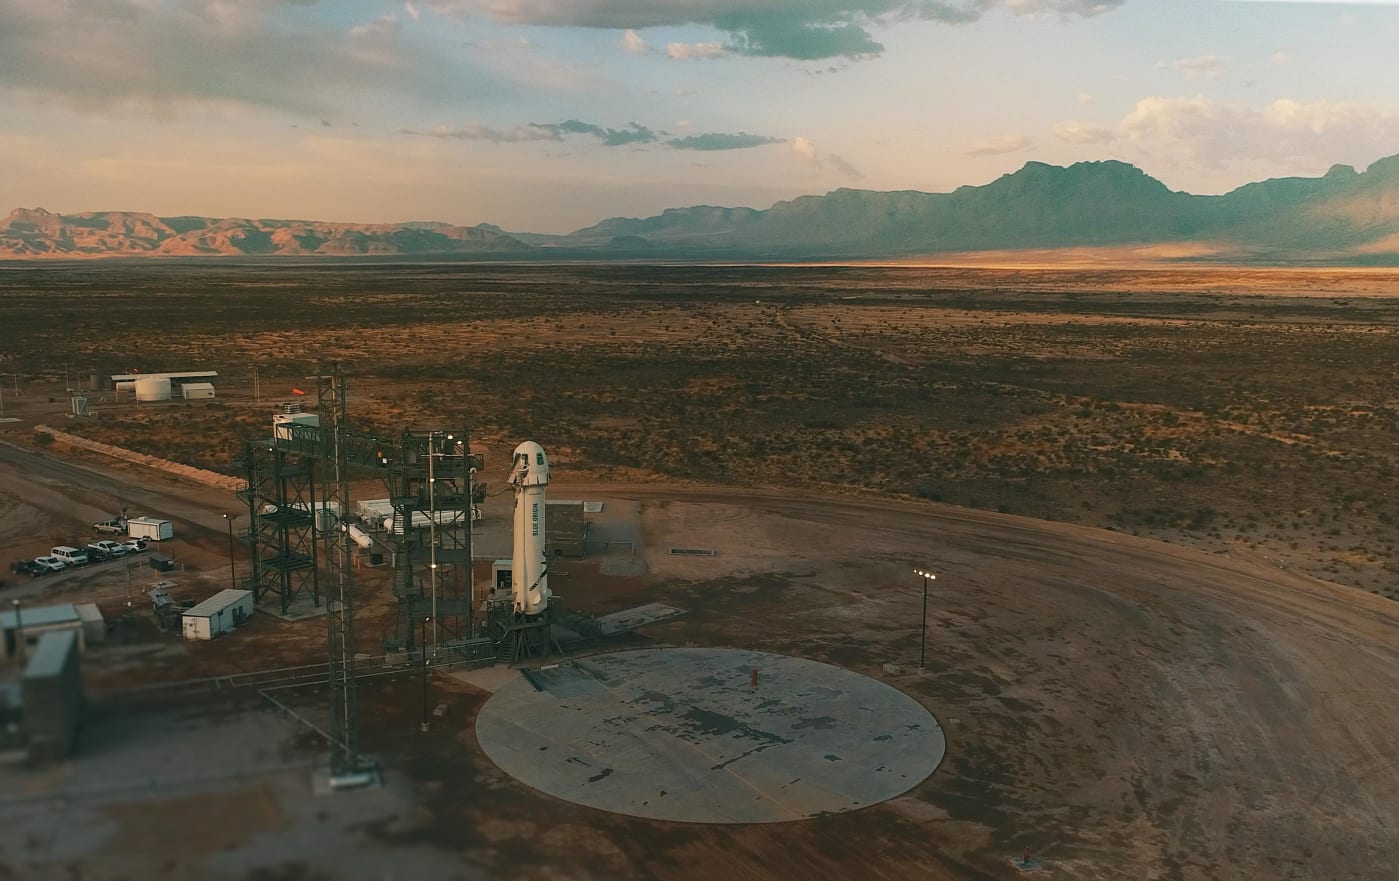 Blue Origin’s New Shepard rocket will return to flight tomorrow after over a year grounded